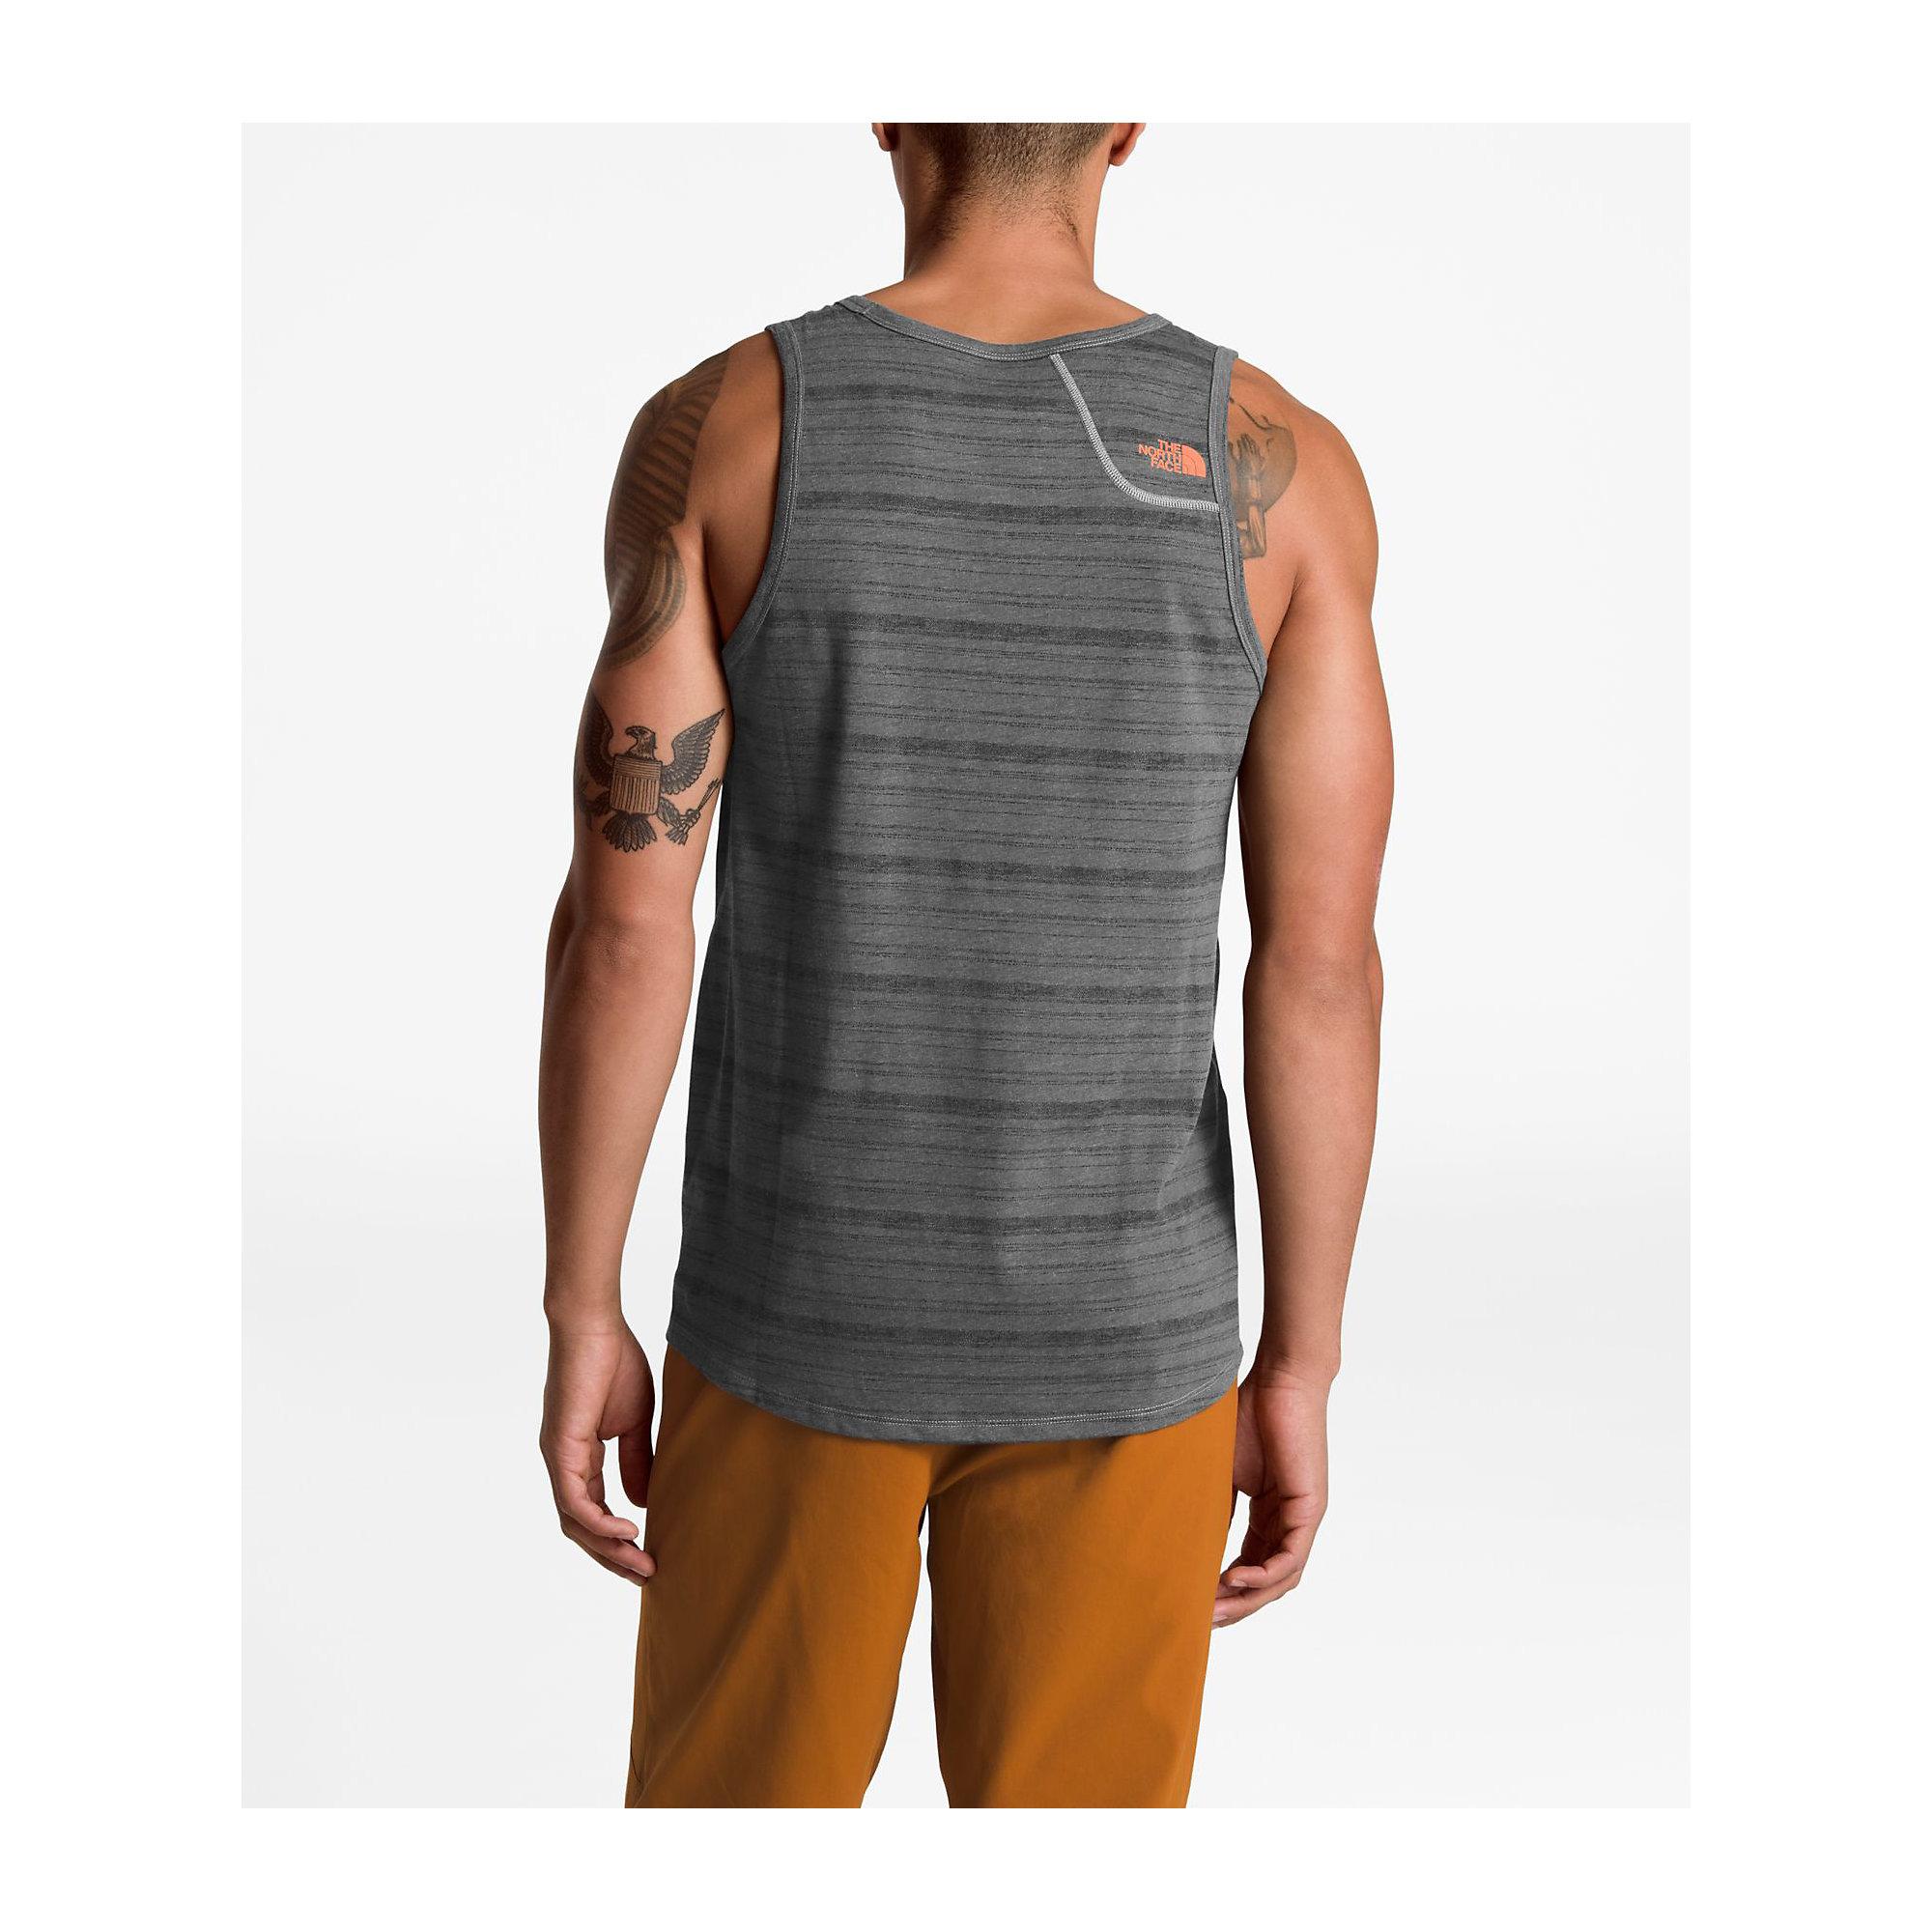 north face beyond the wall tank